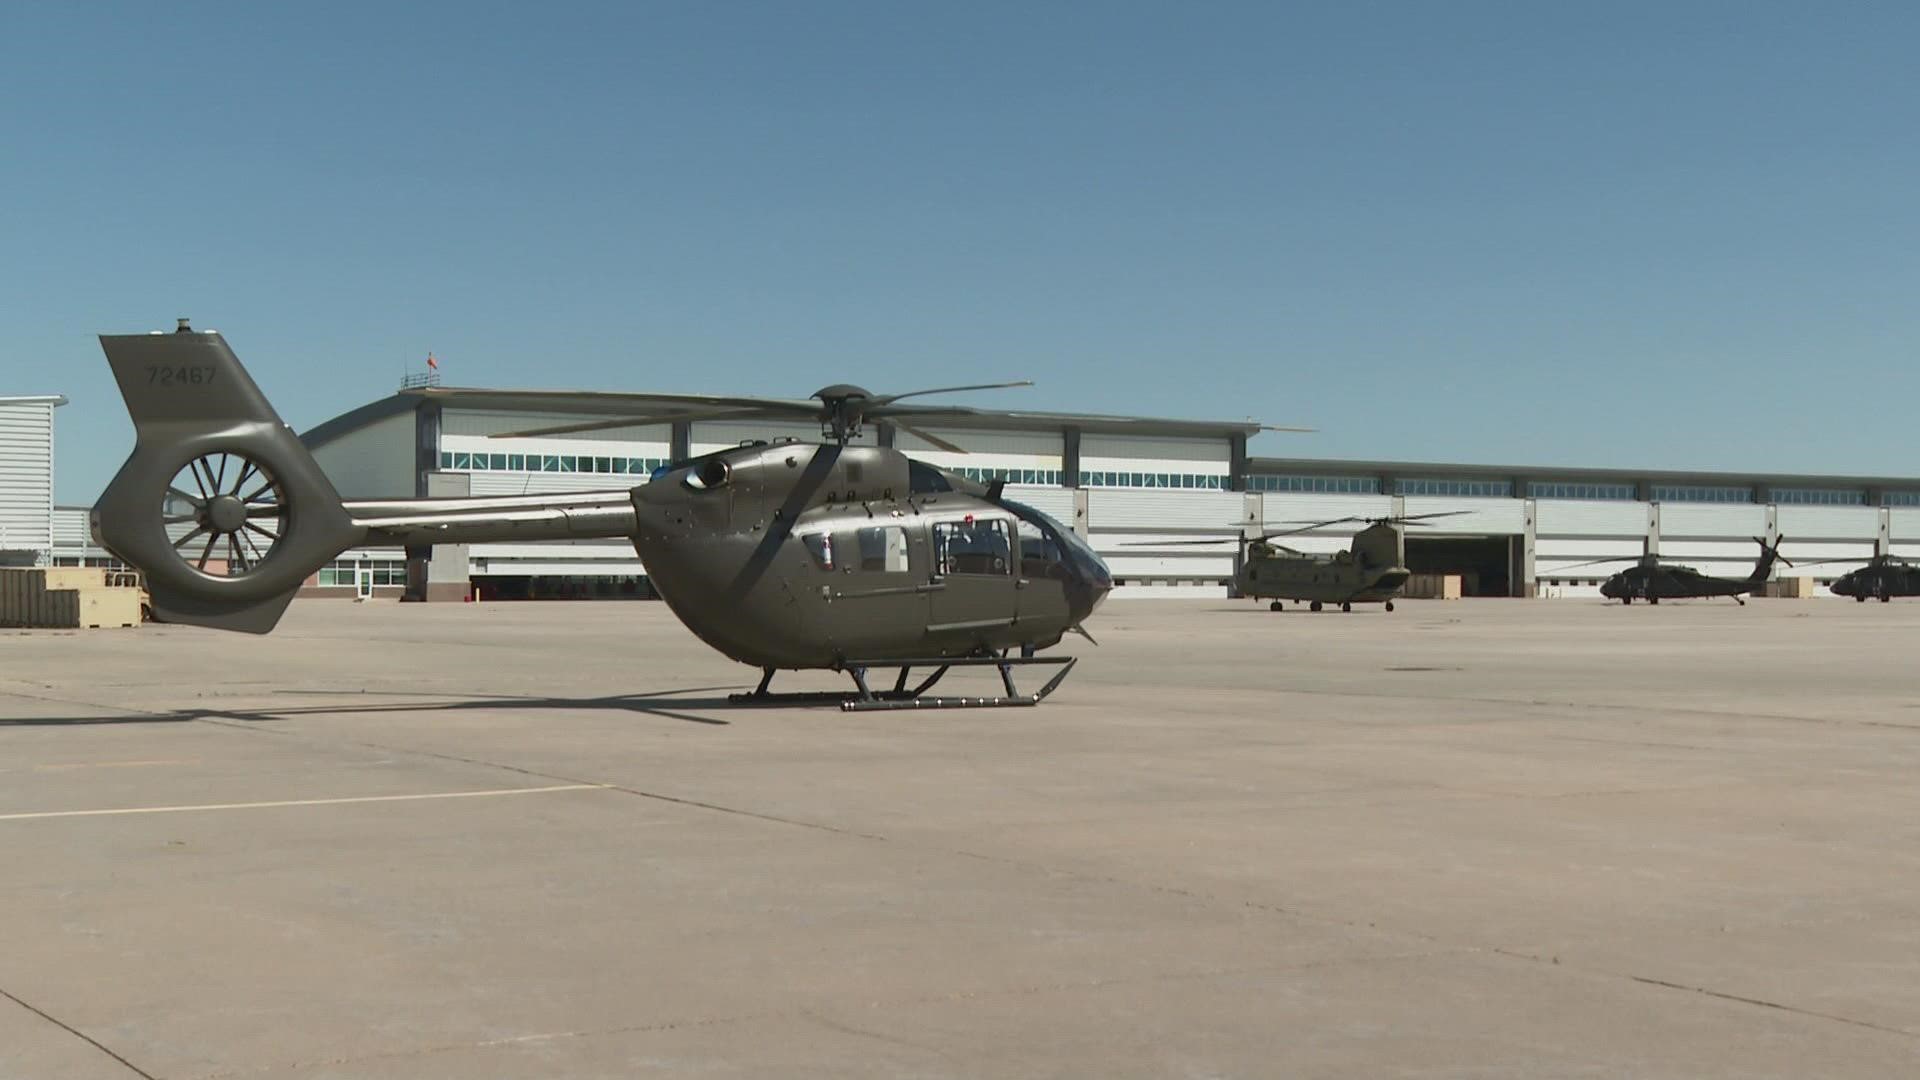 The Department of Defense bought 18 of these helicopters - and Colorado received two.